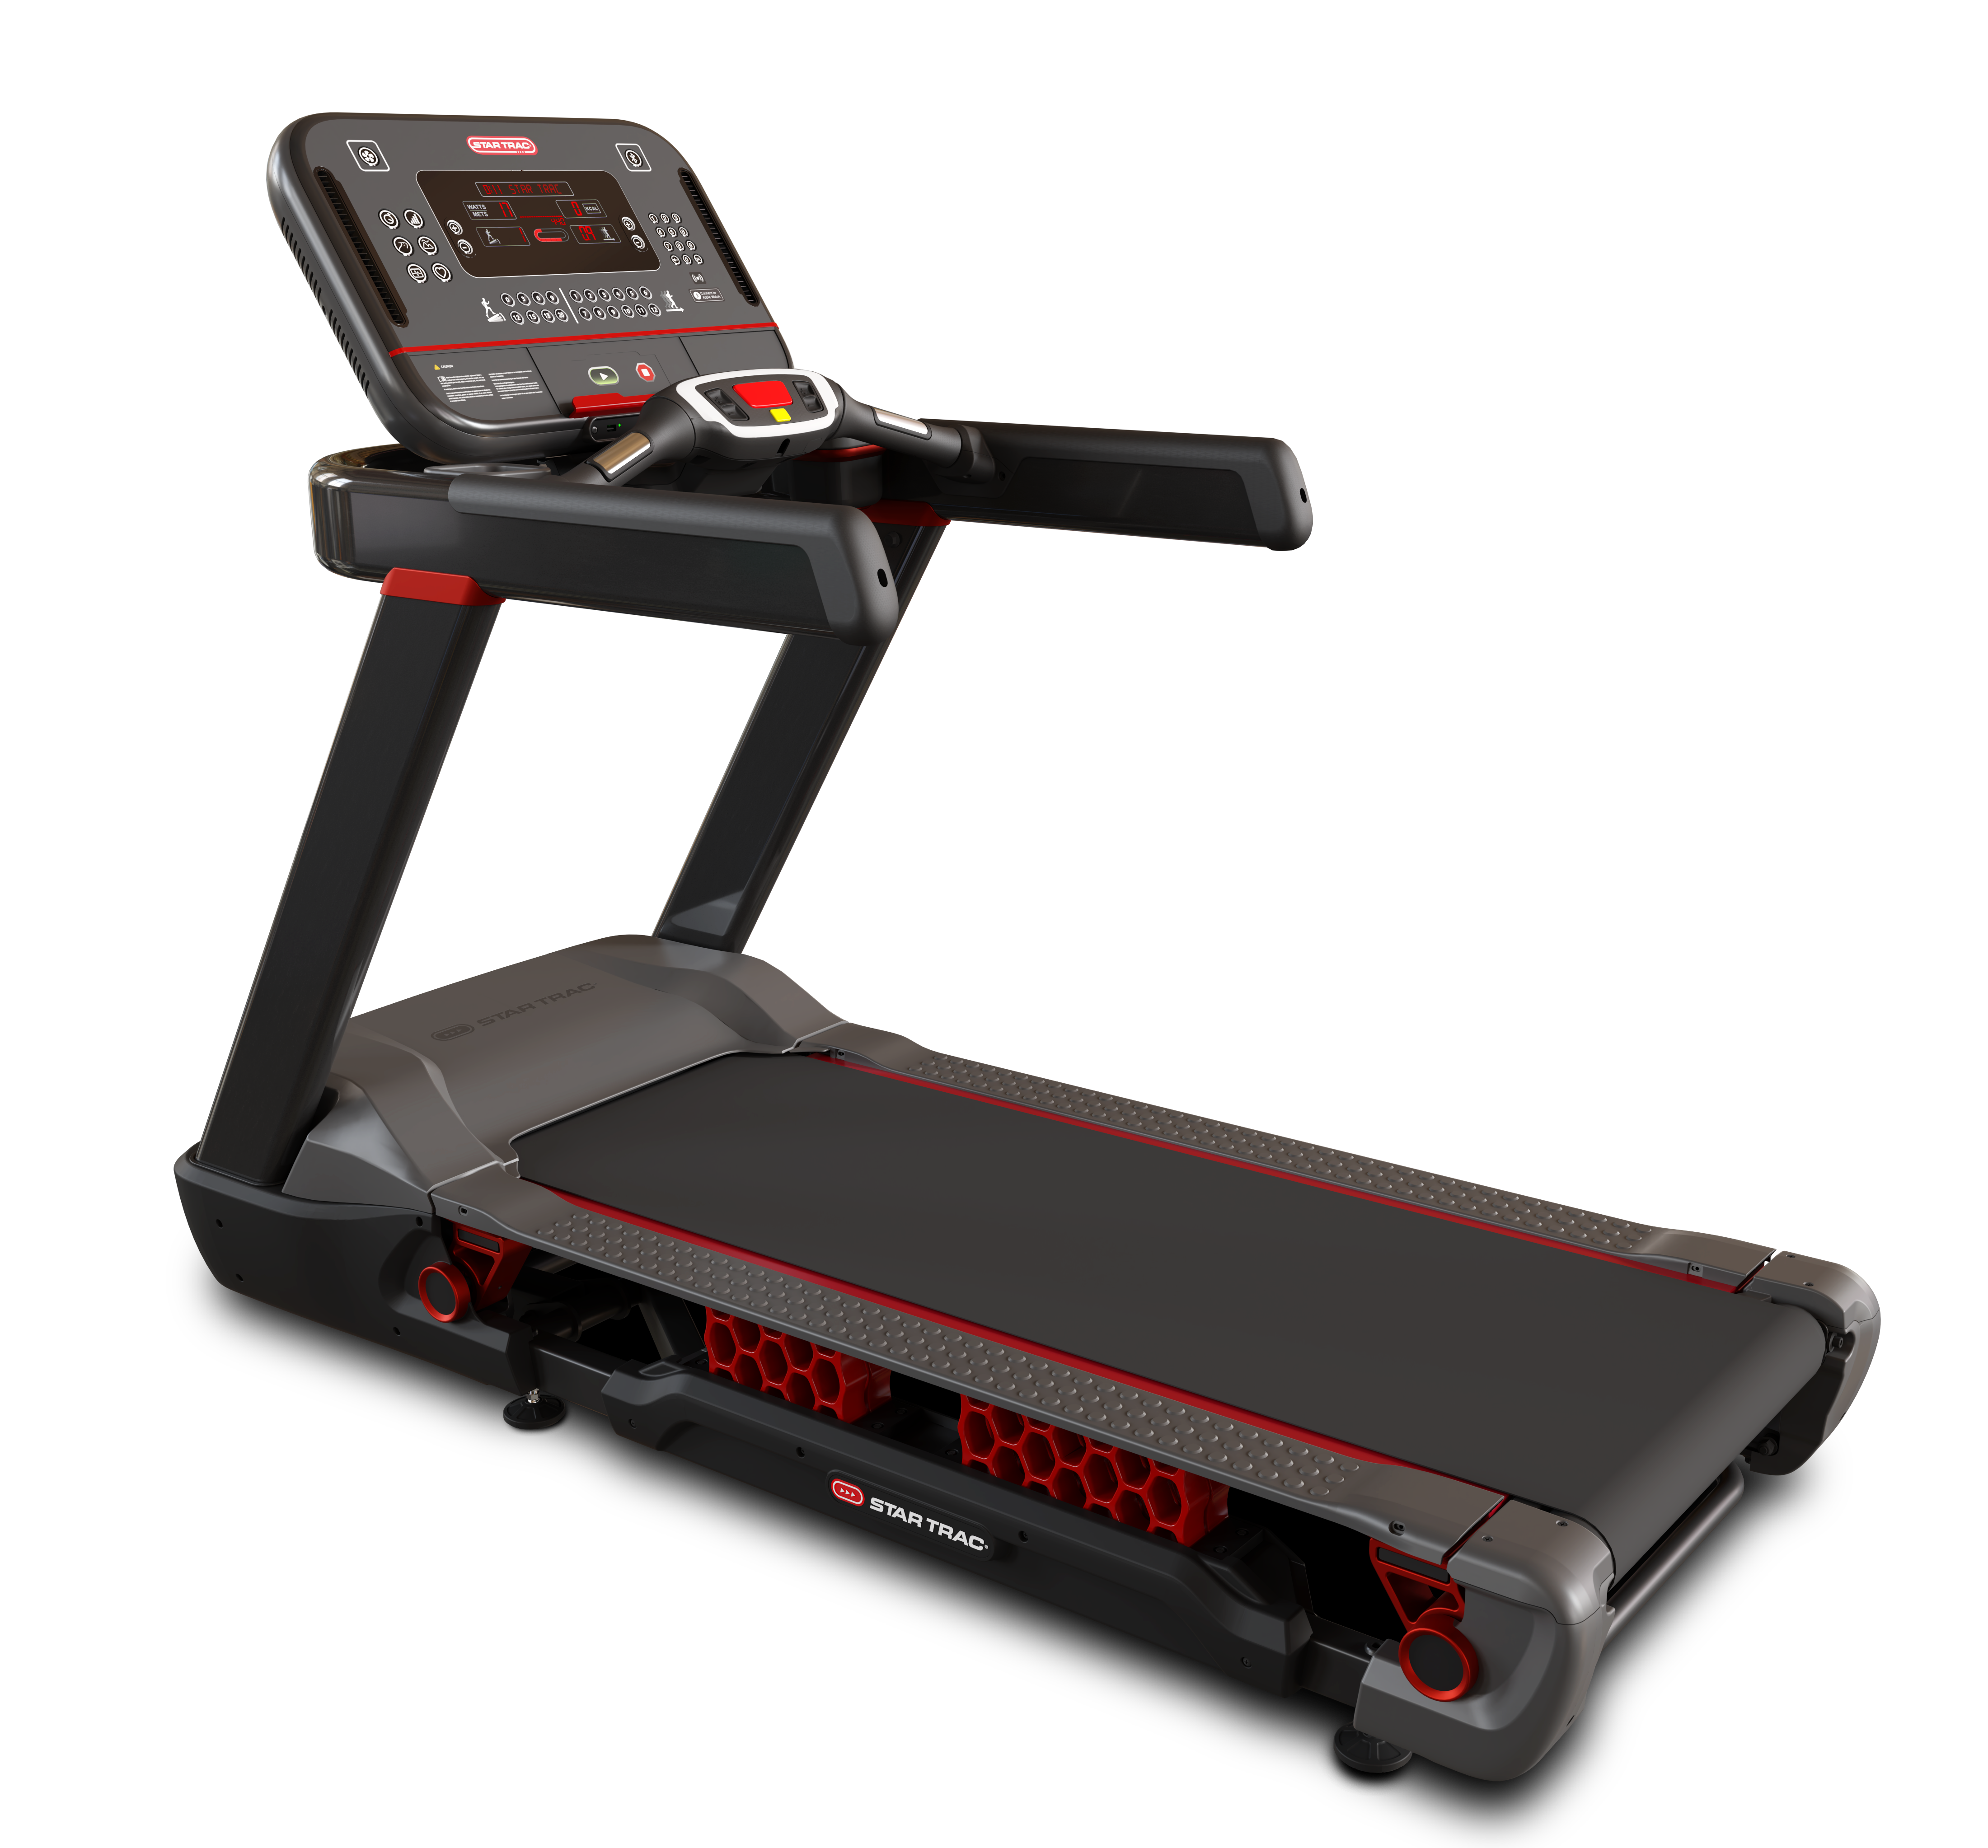 Star Trac FreeRunner 10TRx Treadmill with LCD Console